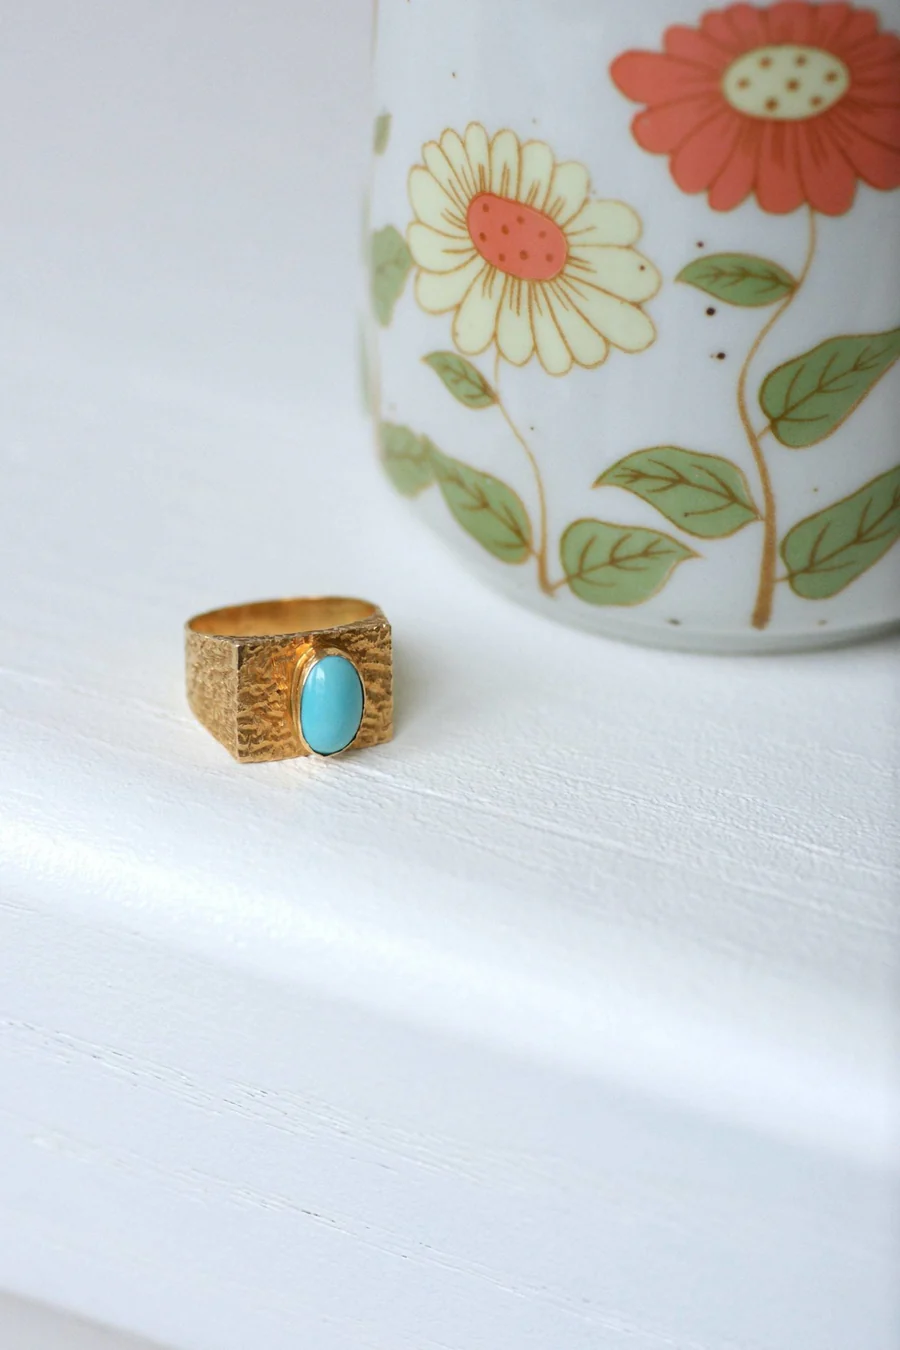 Hammered gold and turquoise signet ring - Penelope Gallery